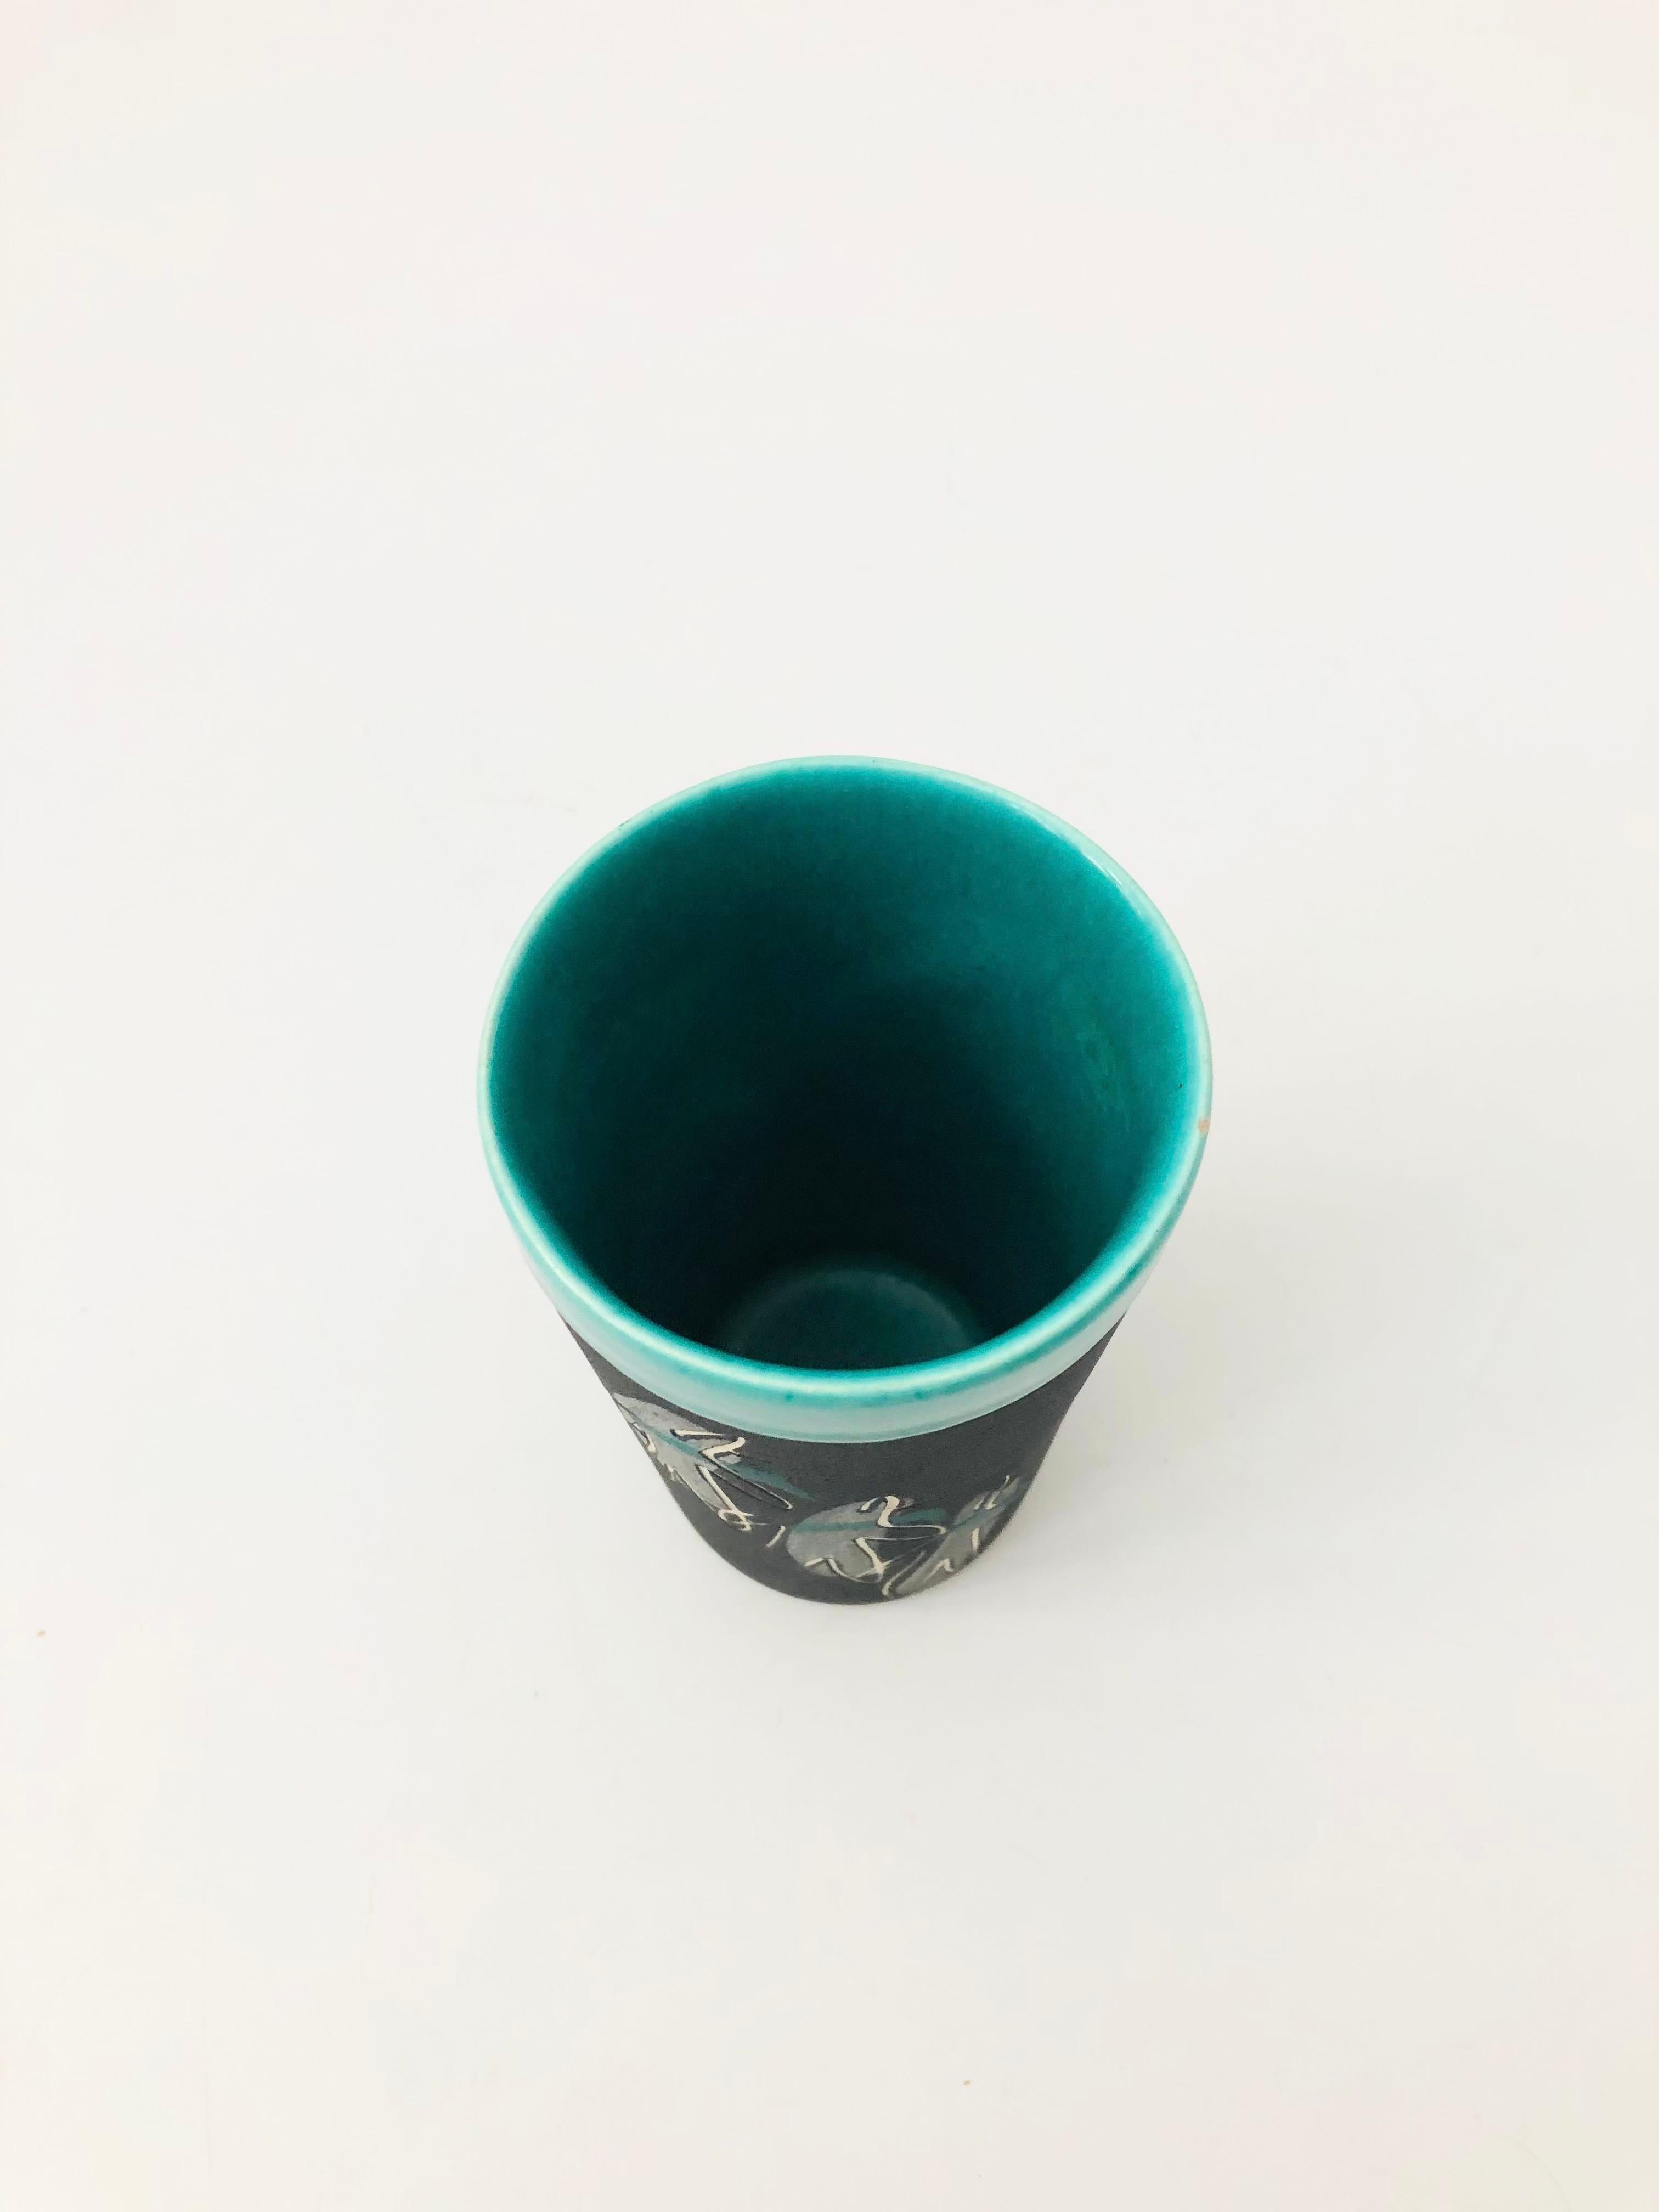 A wonderful midcentury studio pottery tumbler from the 1940s-1950s by ceramicists, Charles and Alice Smith of California. Decorated with a series of figures carved into the sides of the mug. Finished in a matte black glaze with a glossy green glaze